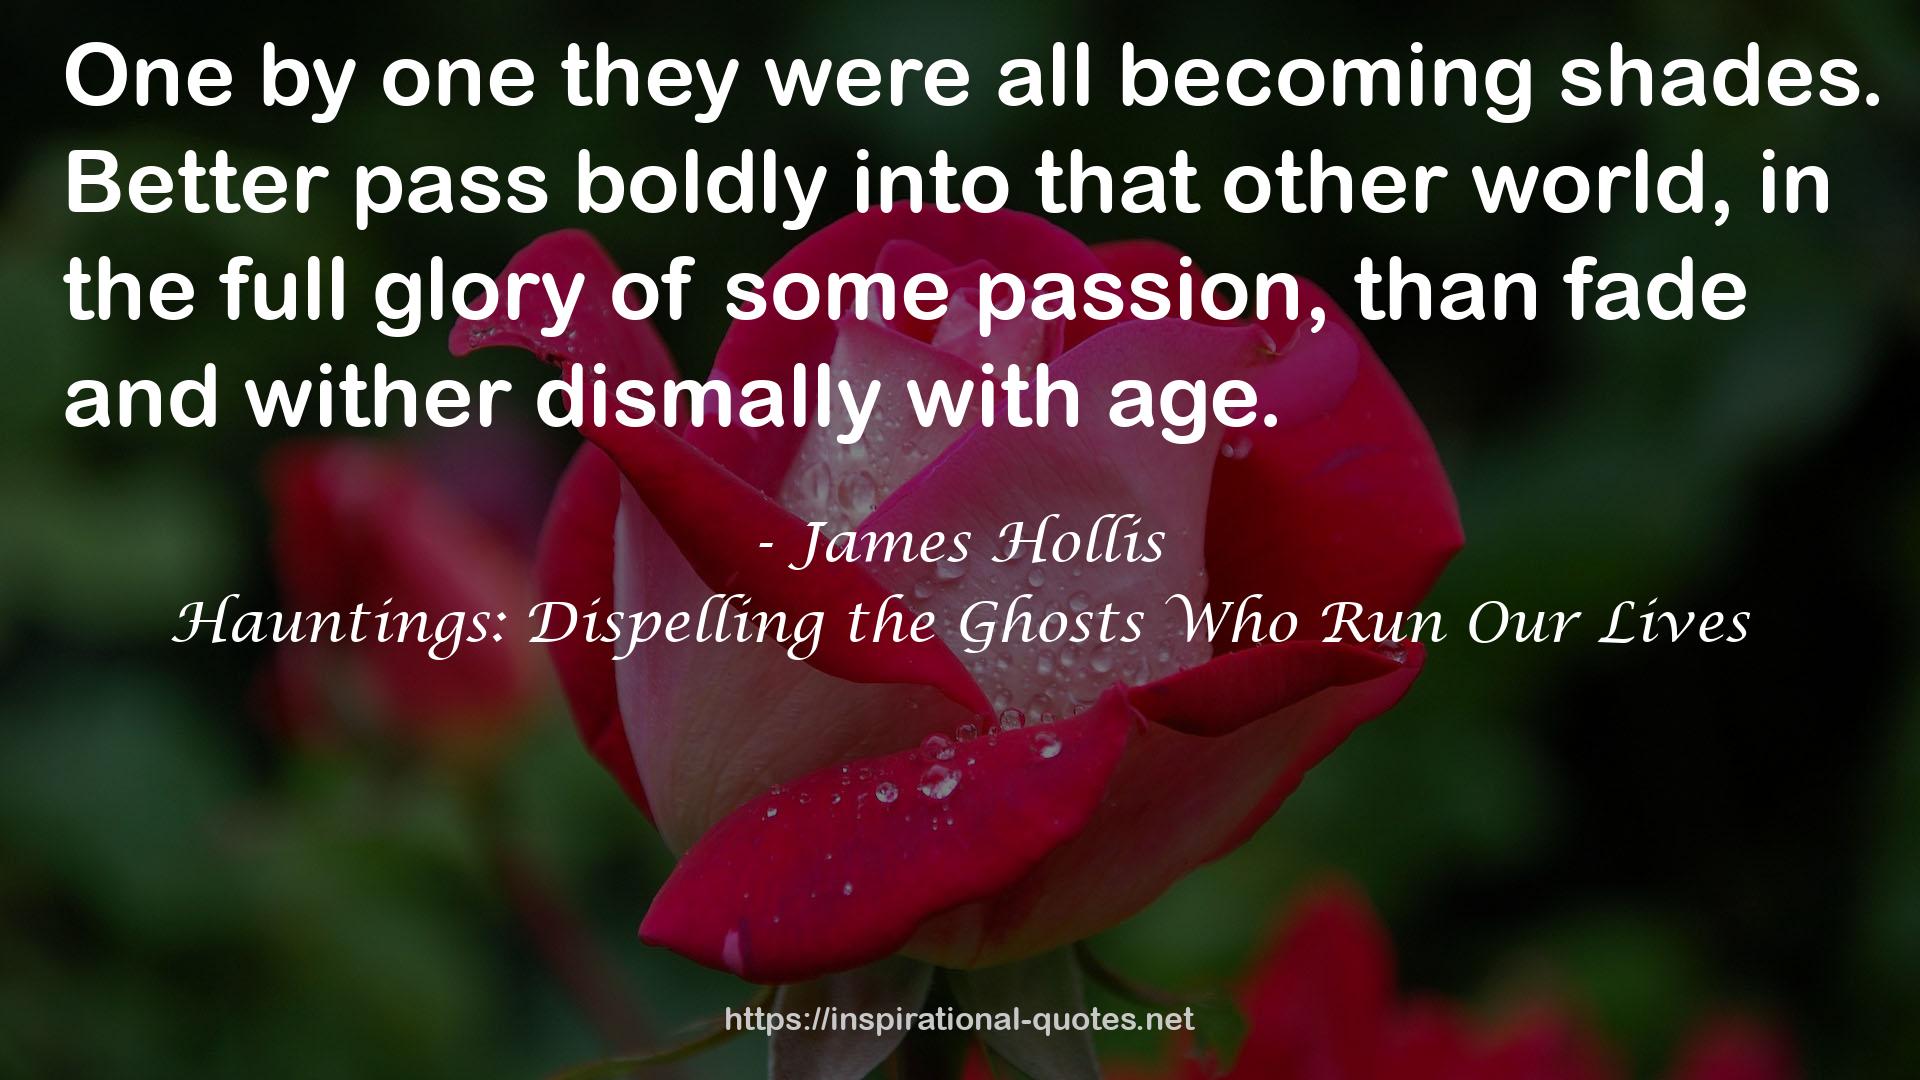 Hauntings: Dispelling the Ghosts Who Run Our Lives QUOTES